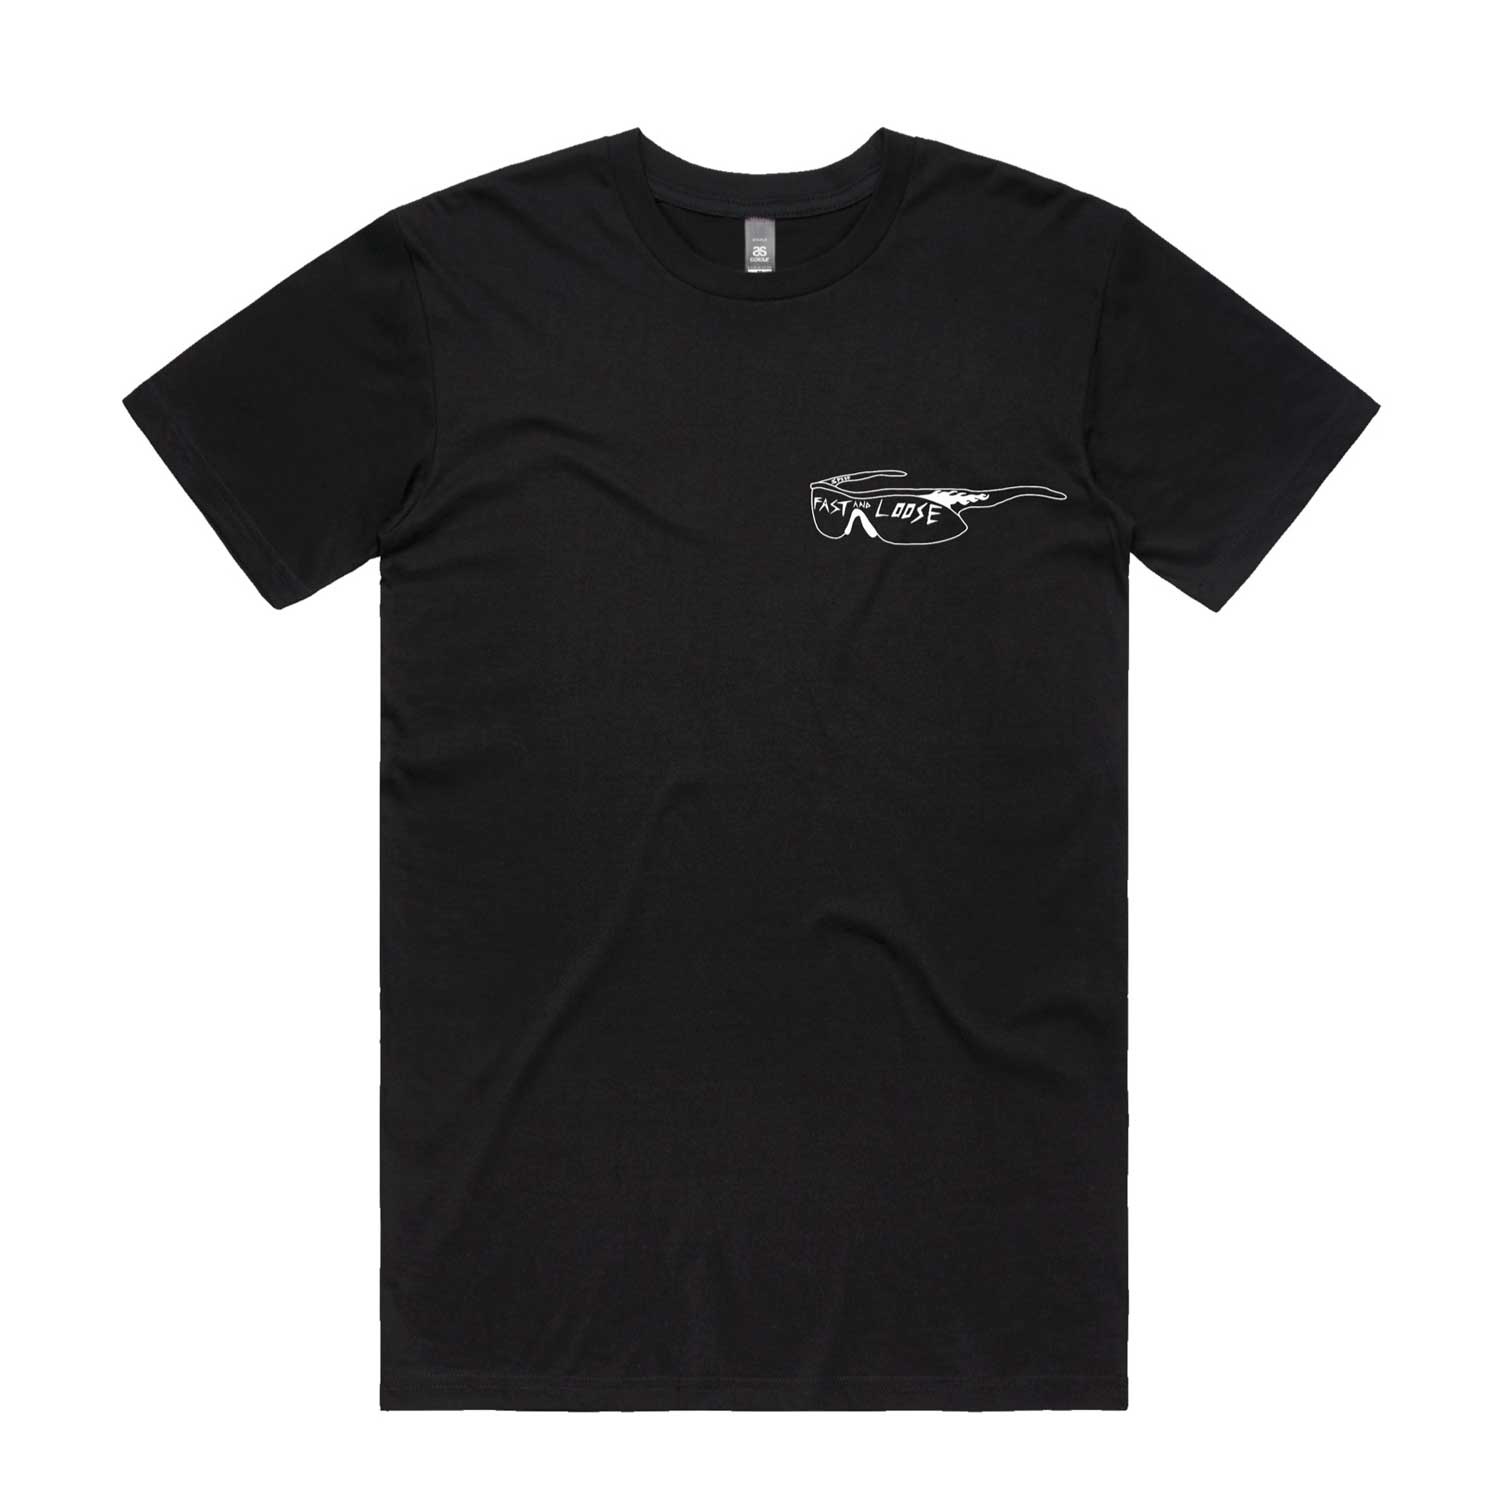 Fast and Loose Speed Dealer Tee